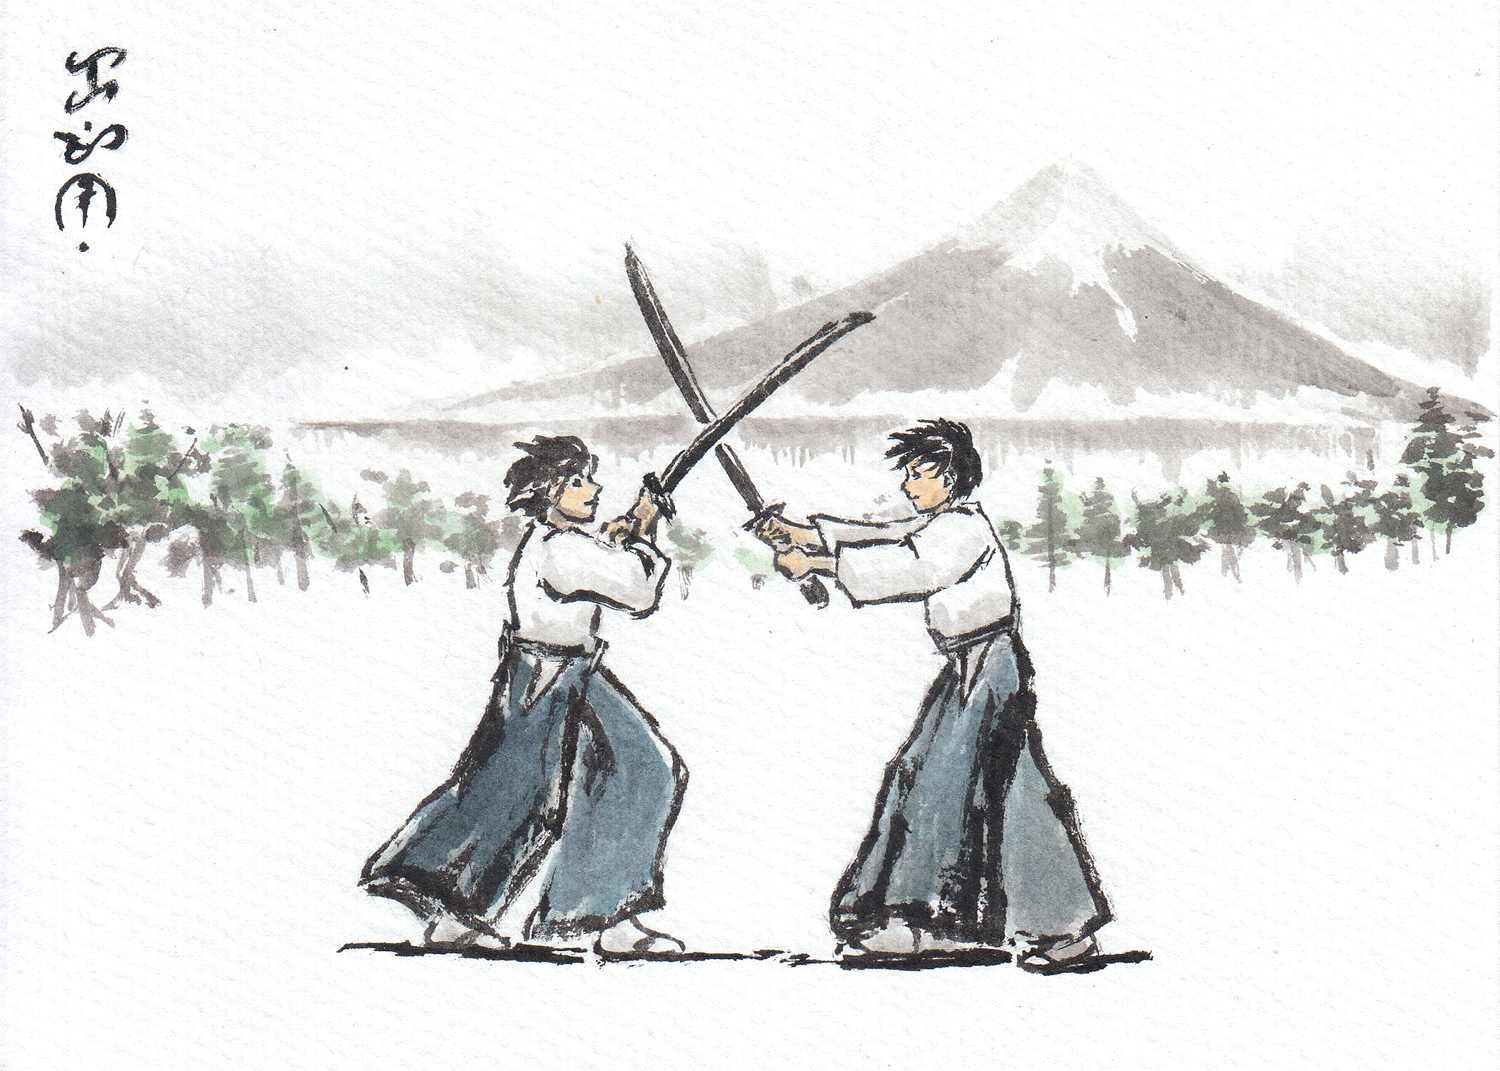 Japanese sword fighting: All about the discipline - Japan Accents